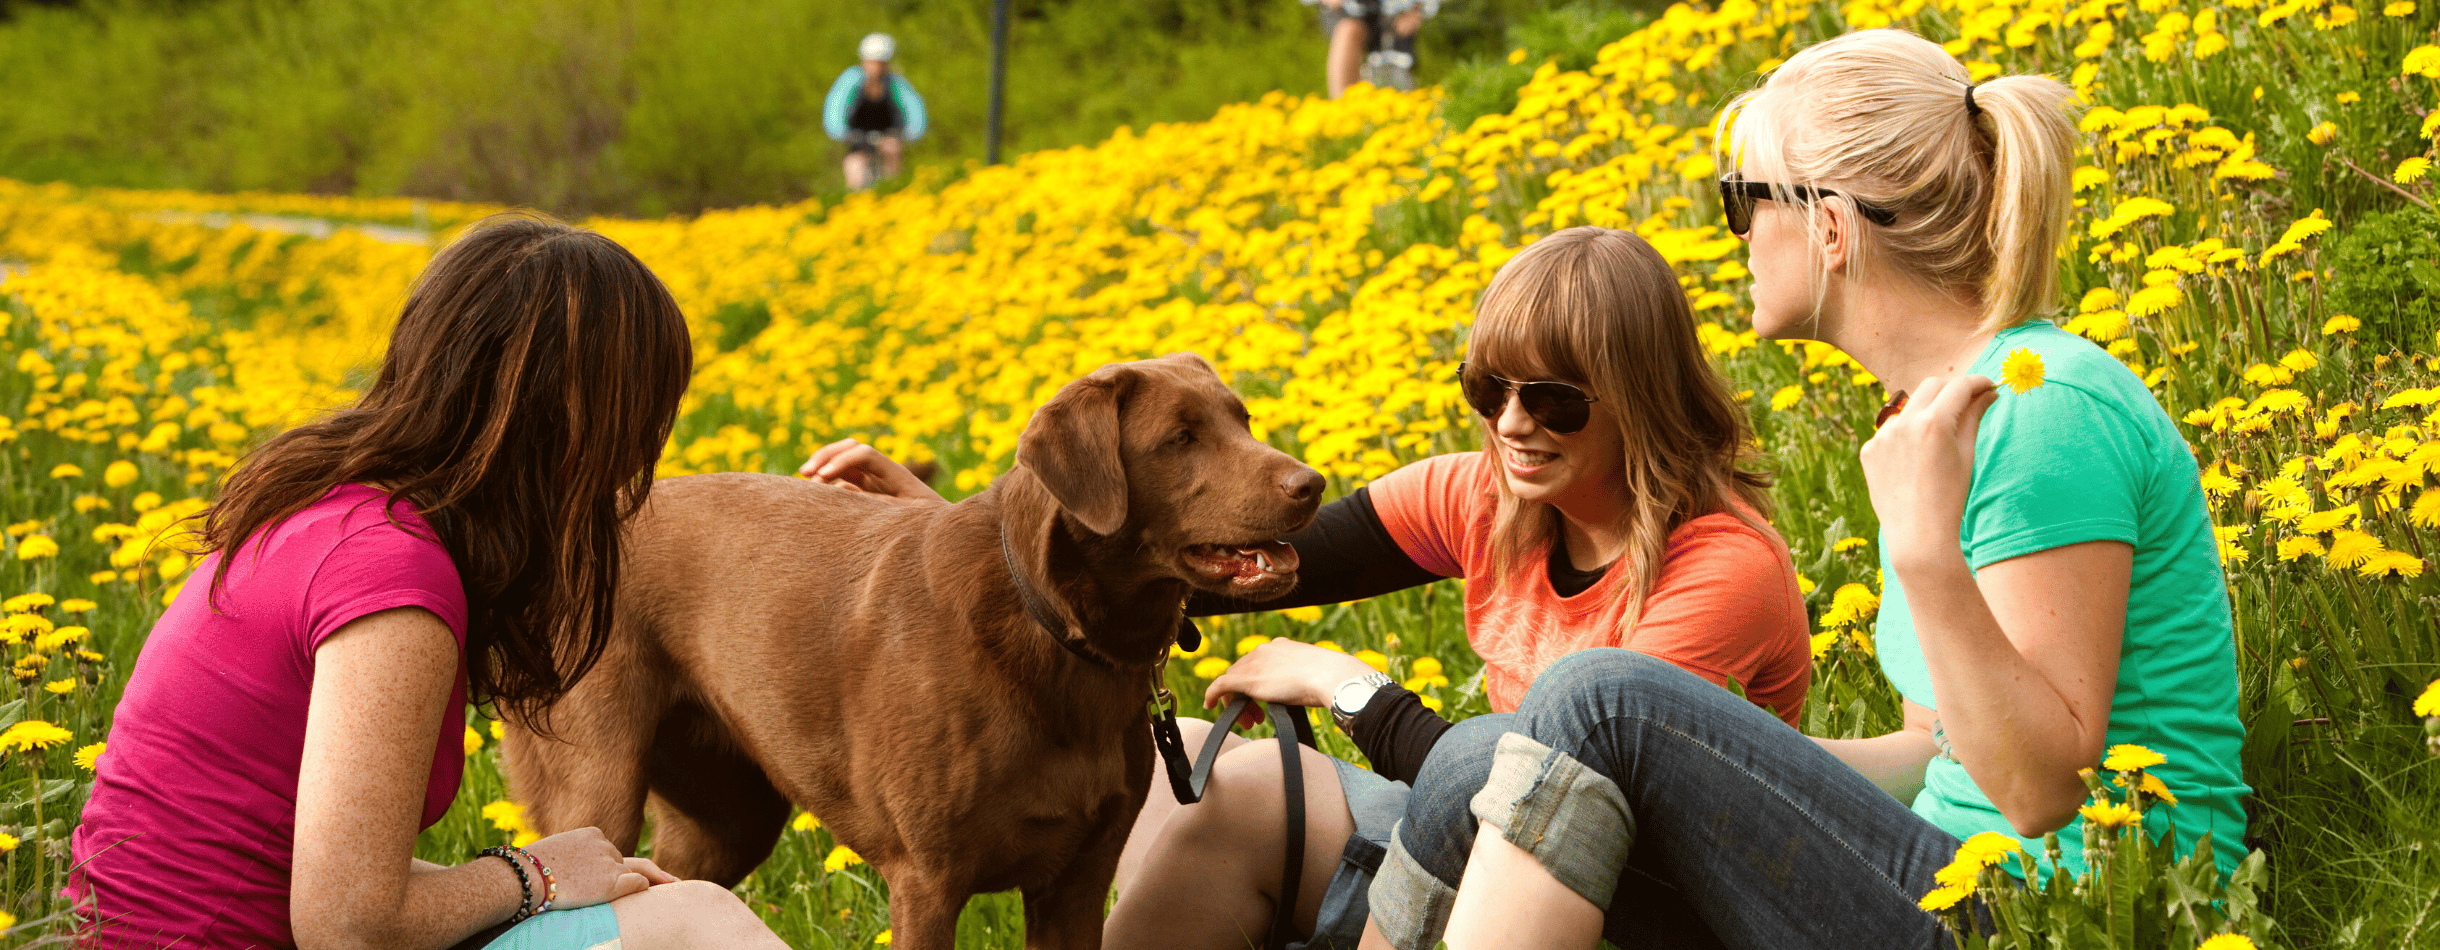 A group of three women enjoy a summer day as they pet one of their brown dogs. They're sitting in a yellow dandelion field and in the background two cyclists pass by.